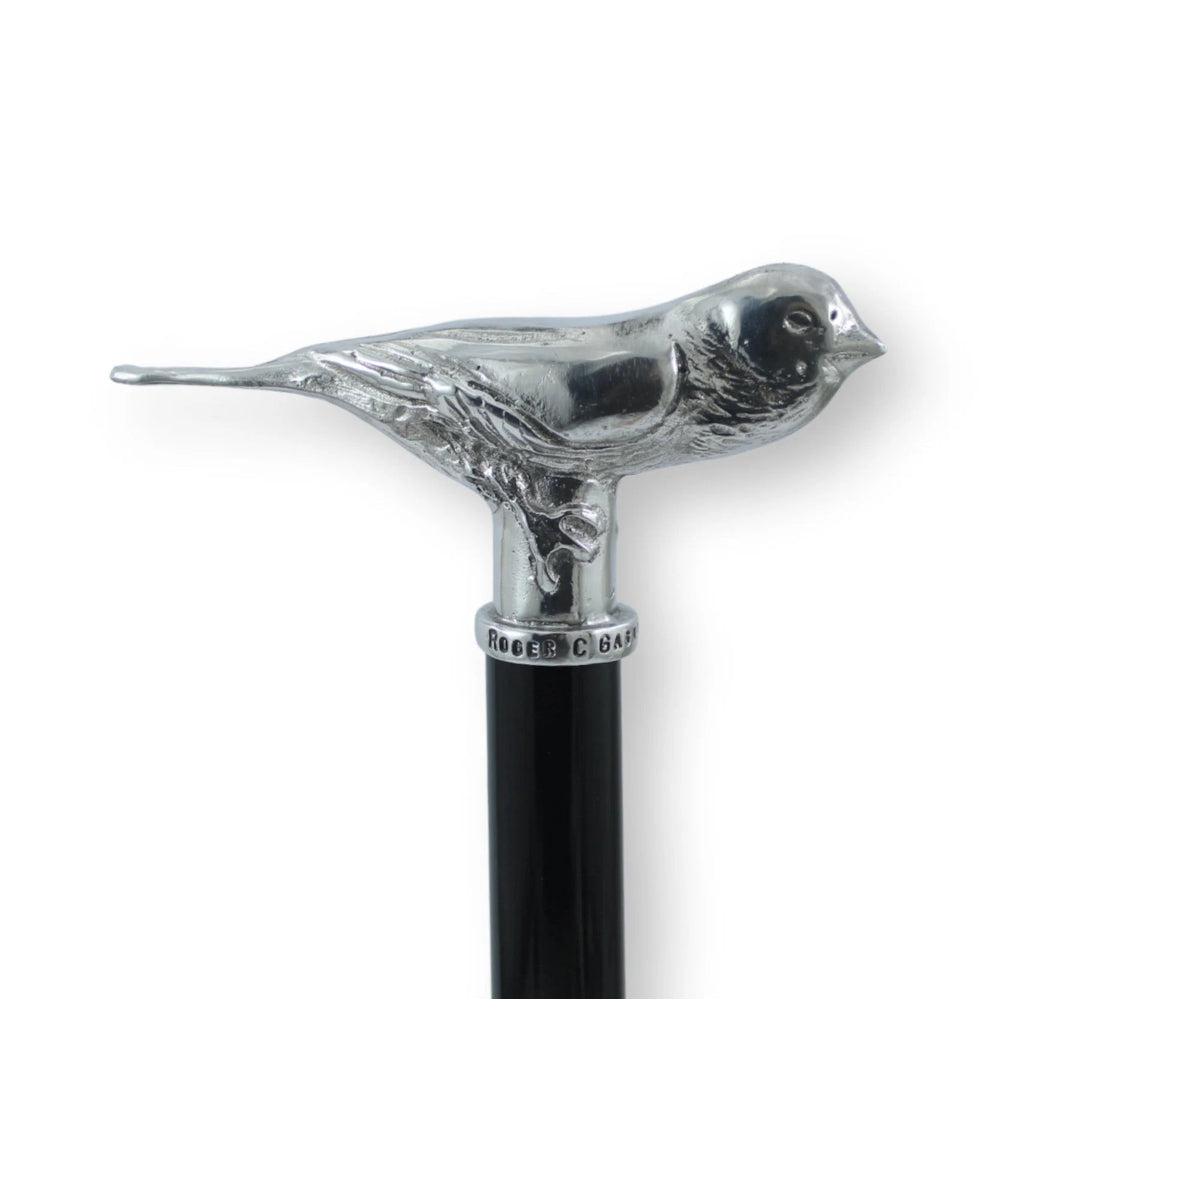 Handcrafted Solid Pewter Bird Cane or Walking Stick